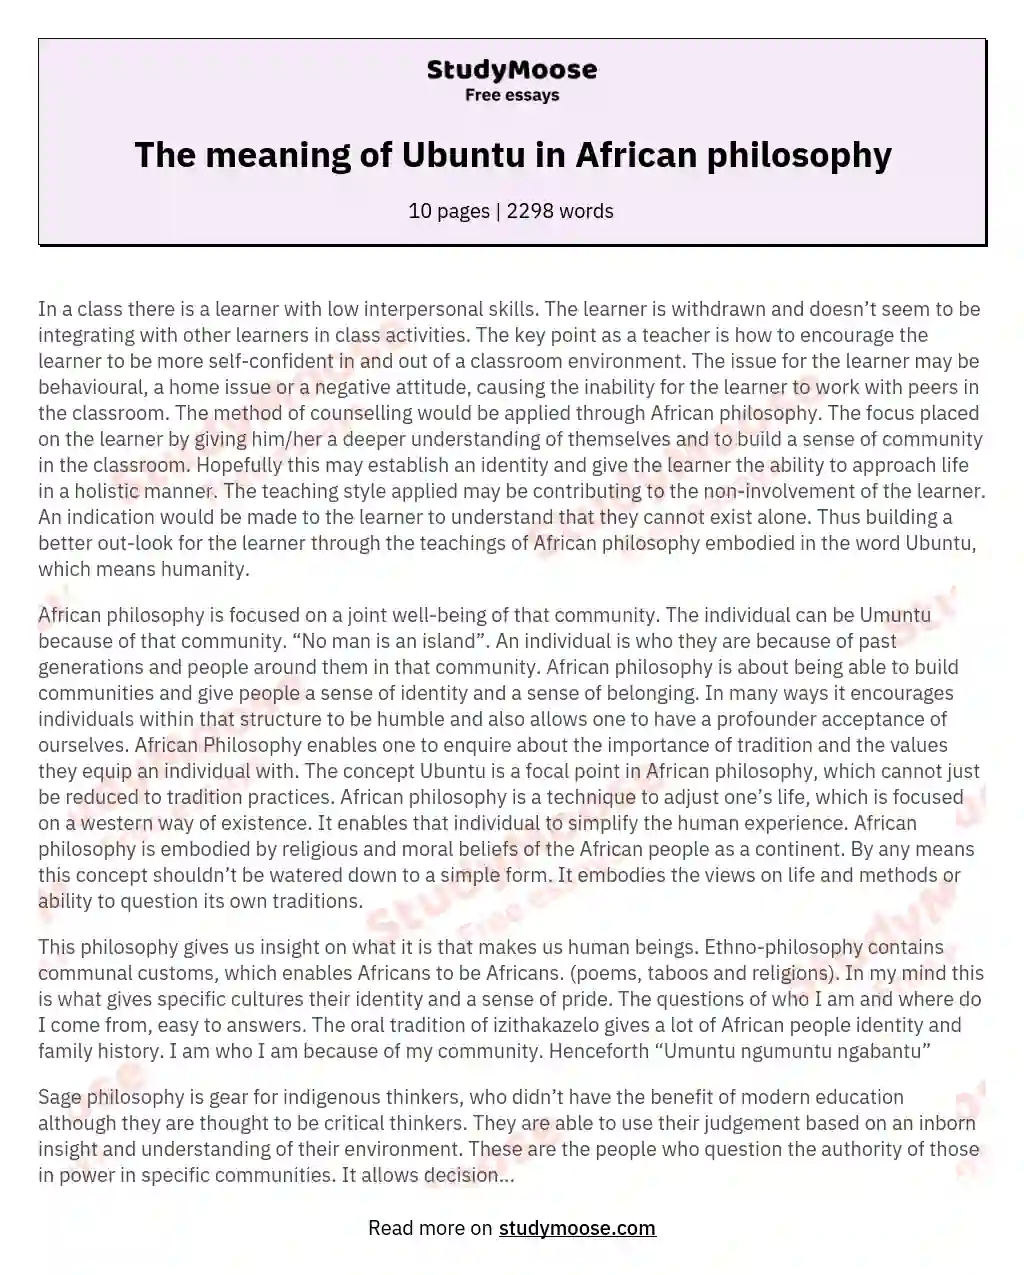 The meaning of Ubuntu in African philosophy essay